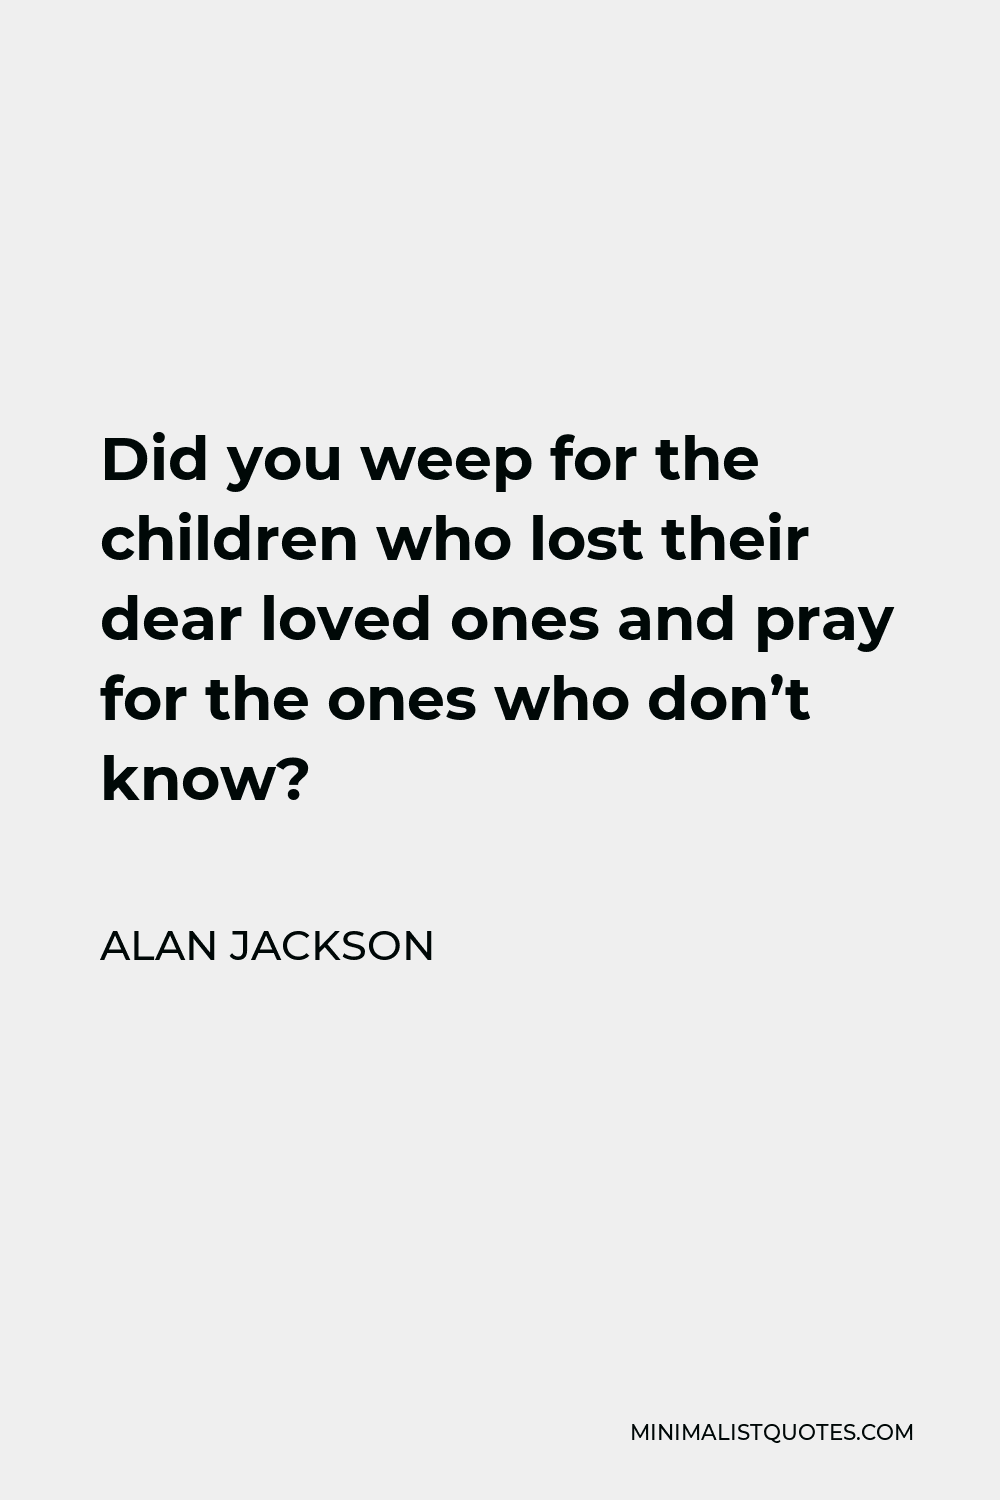 Alan Jackson Quote - Did you weep for the children who lost their dear loved ones and pray for the ones who don’t know?